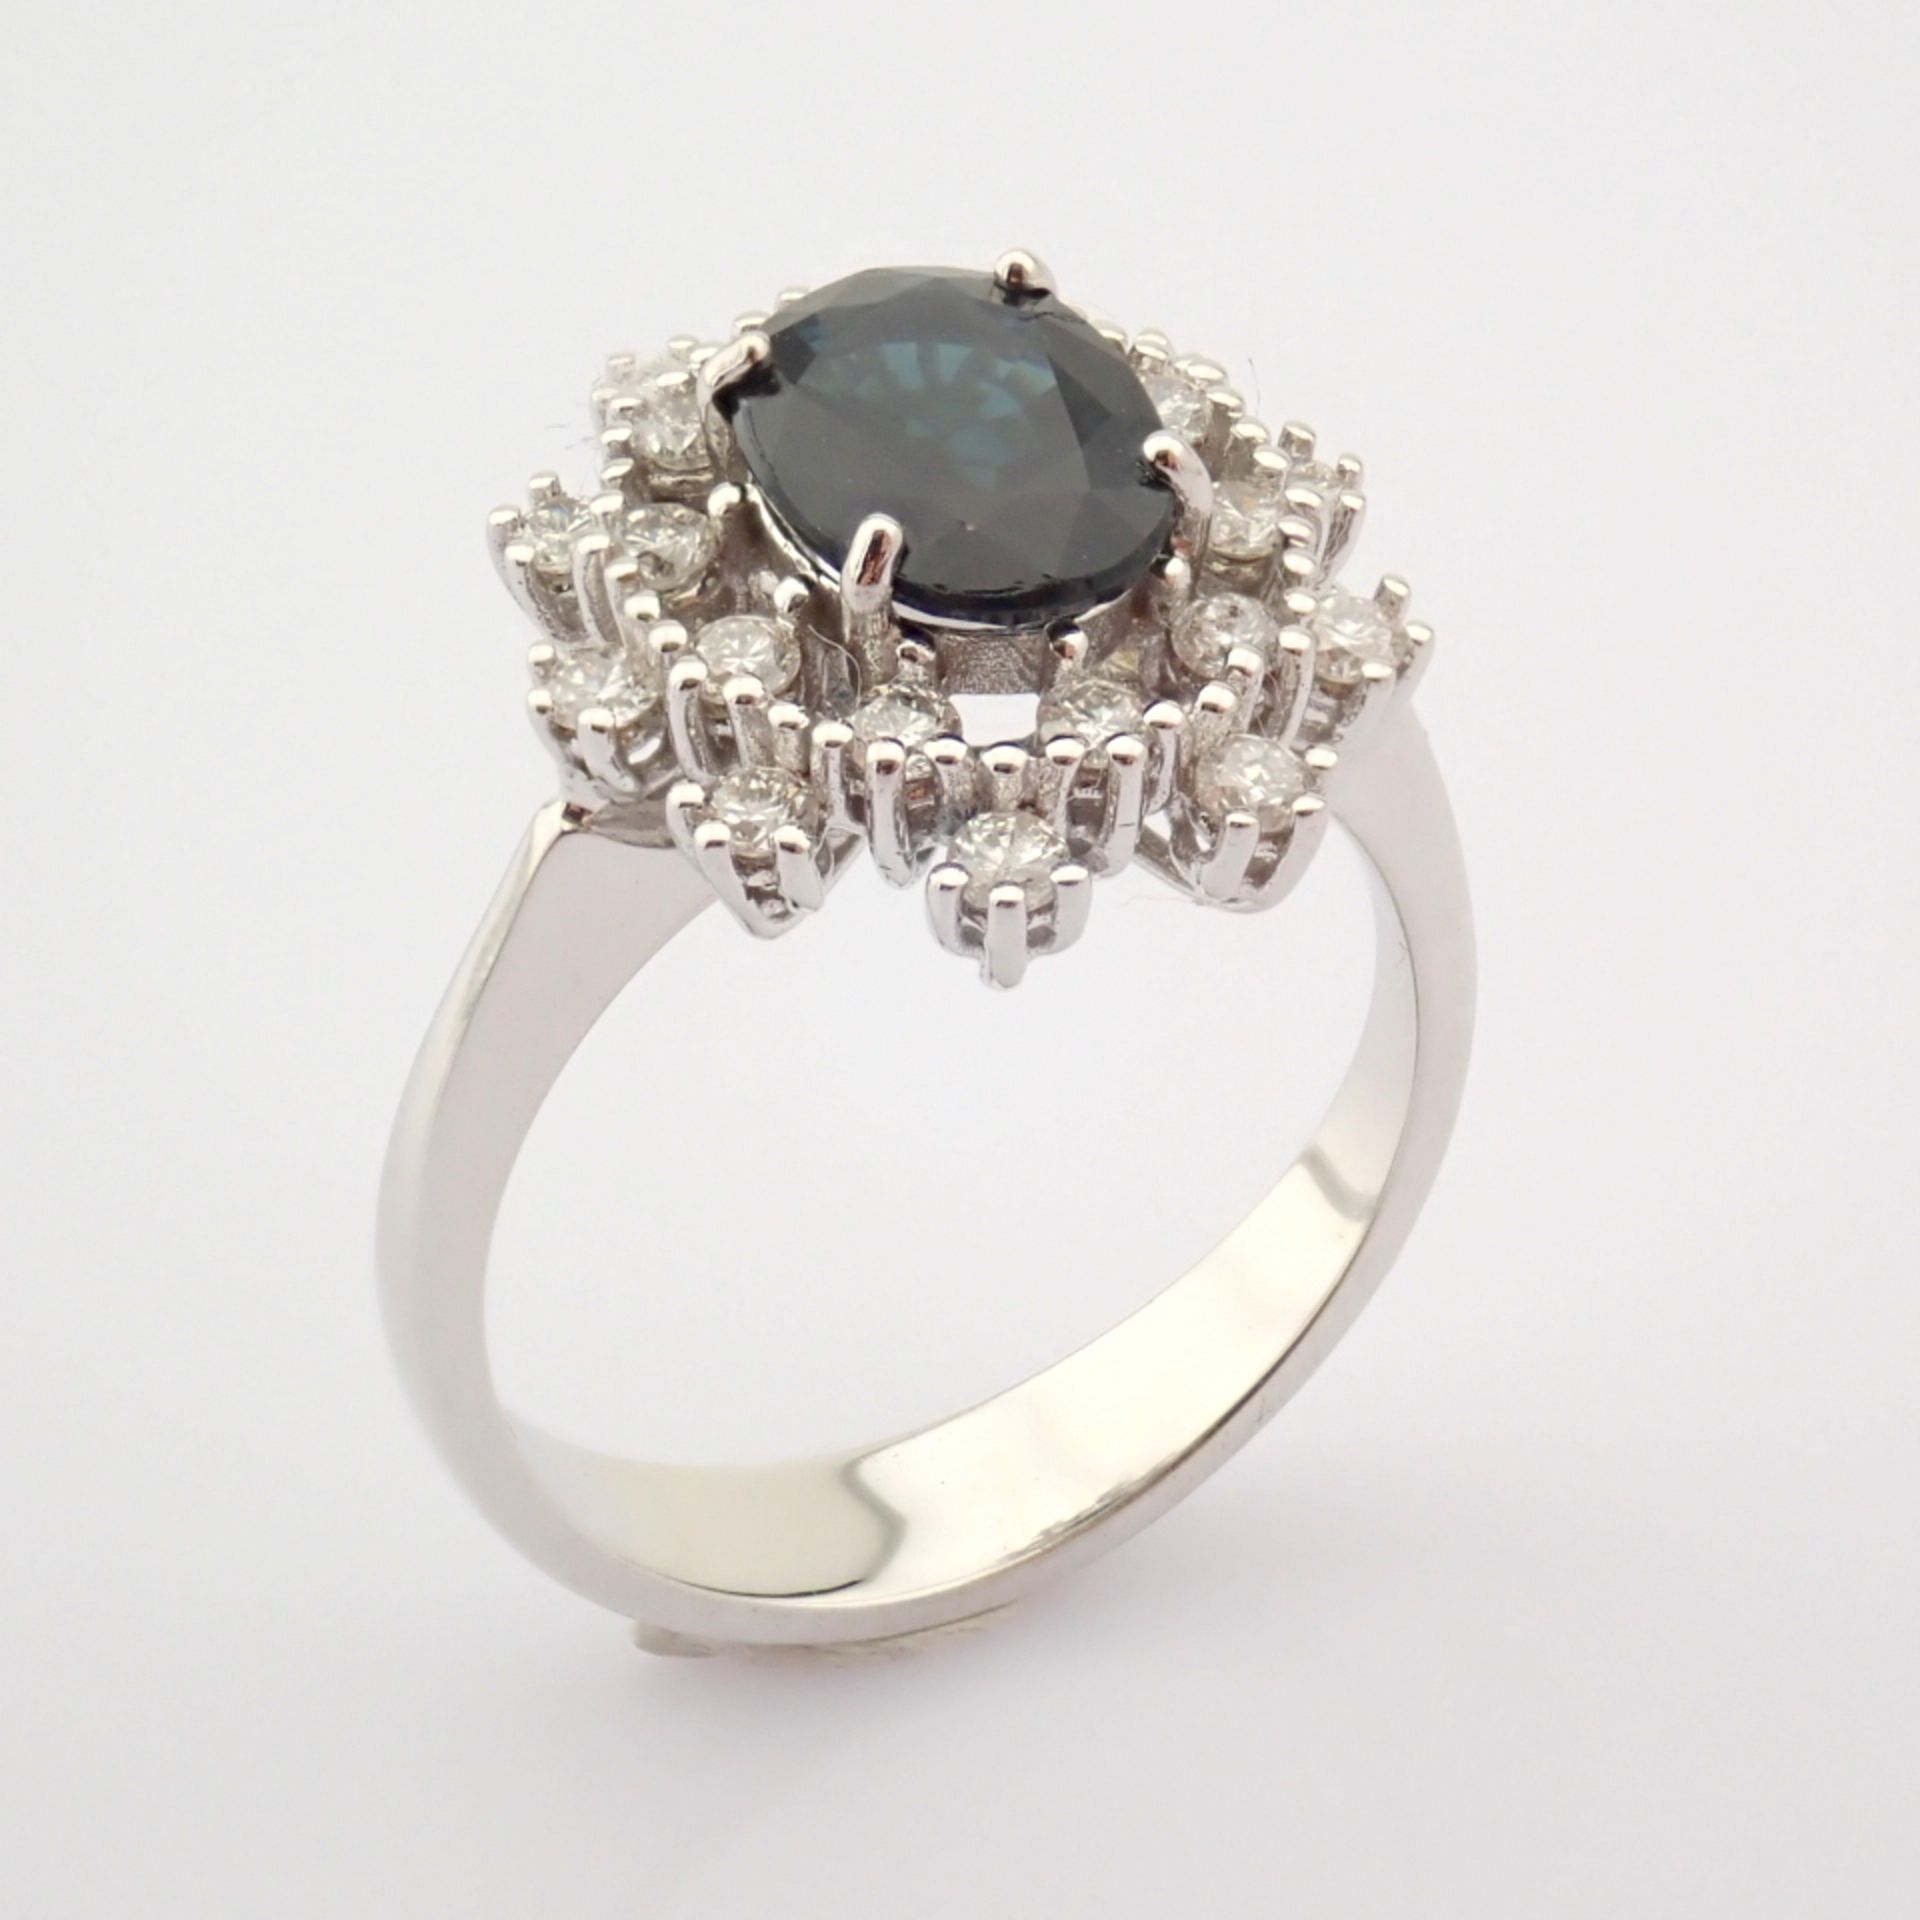 Certificated 18K White Gold Diamond & Sapphire Ring - Image 6 of 6